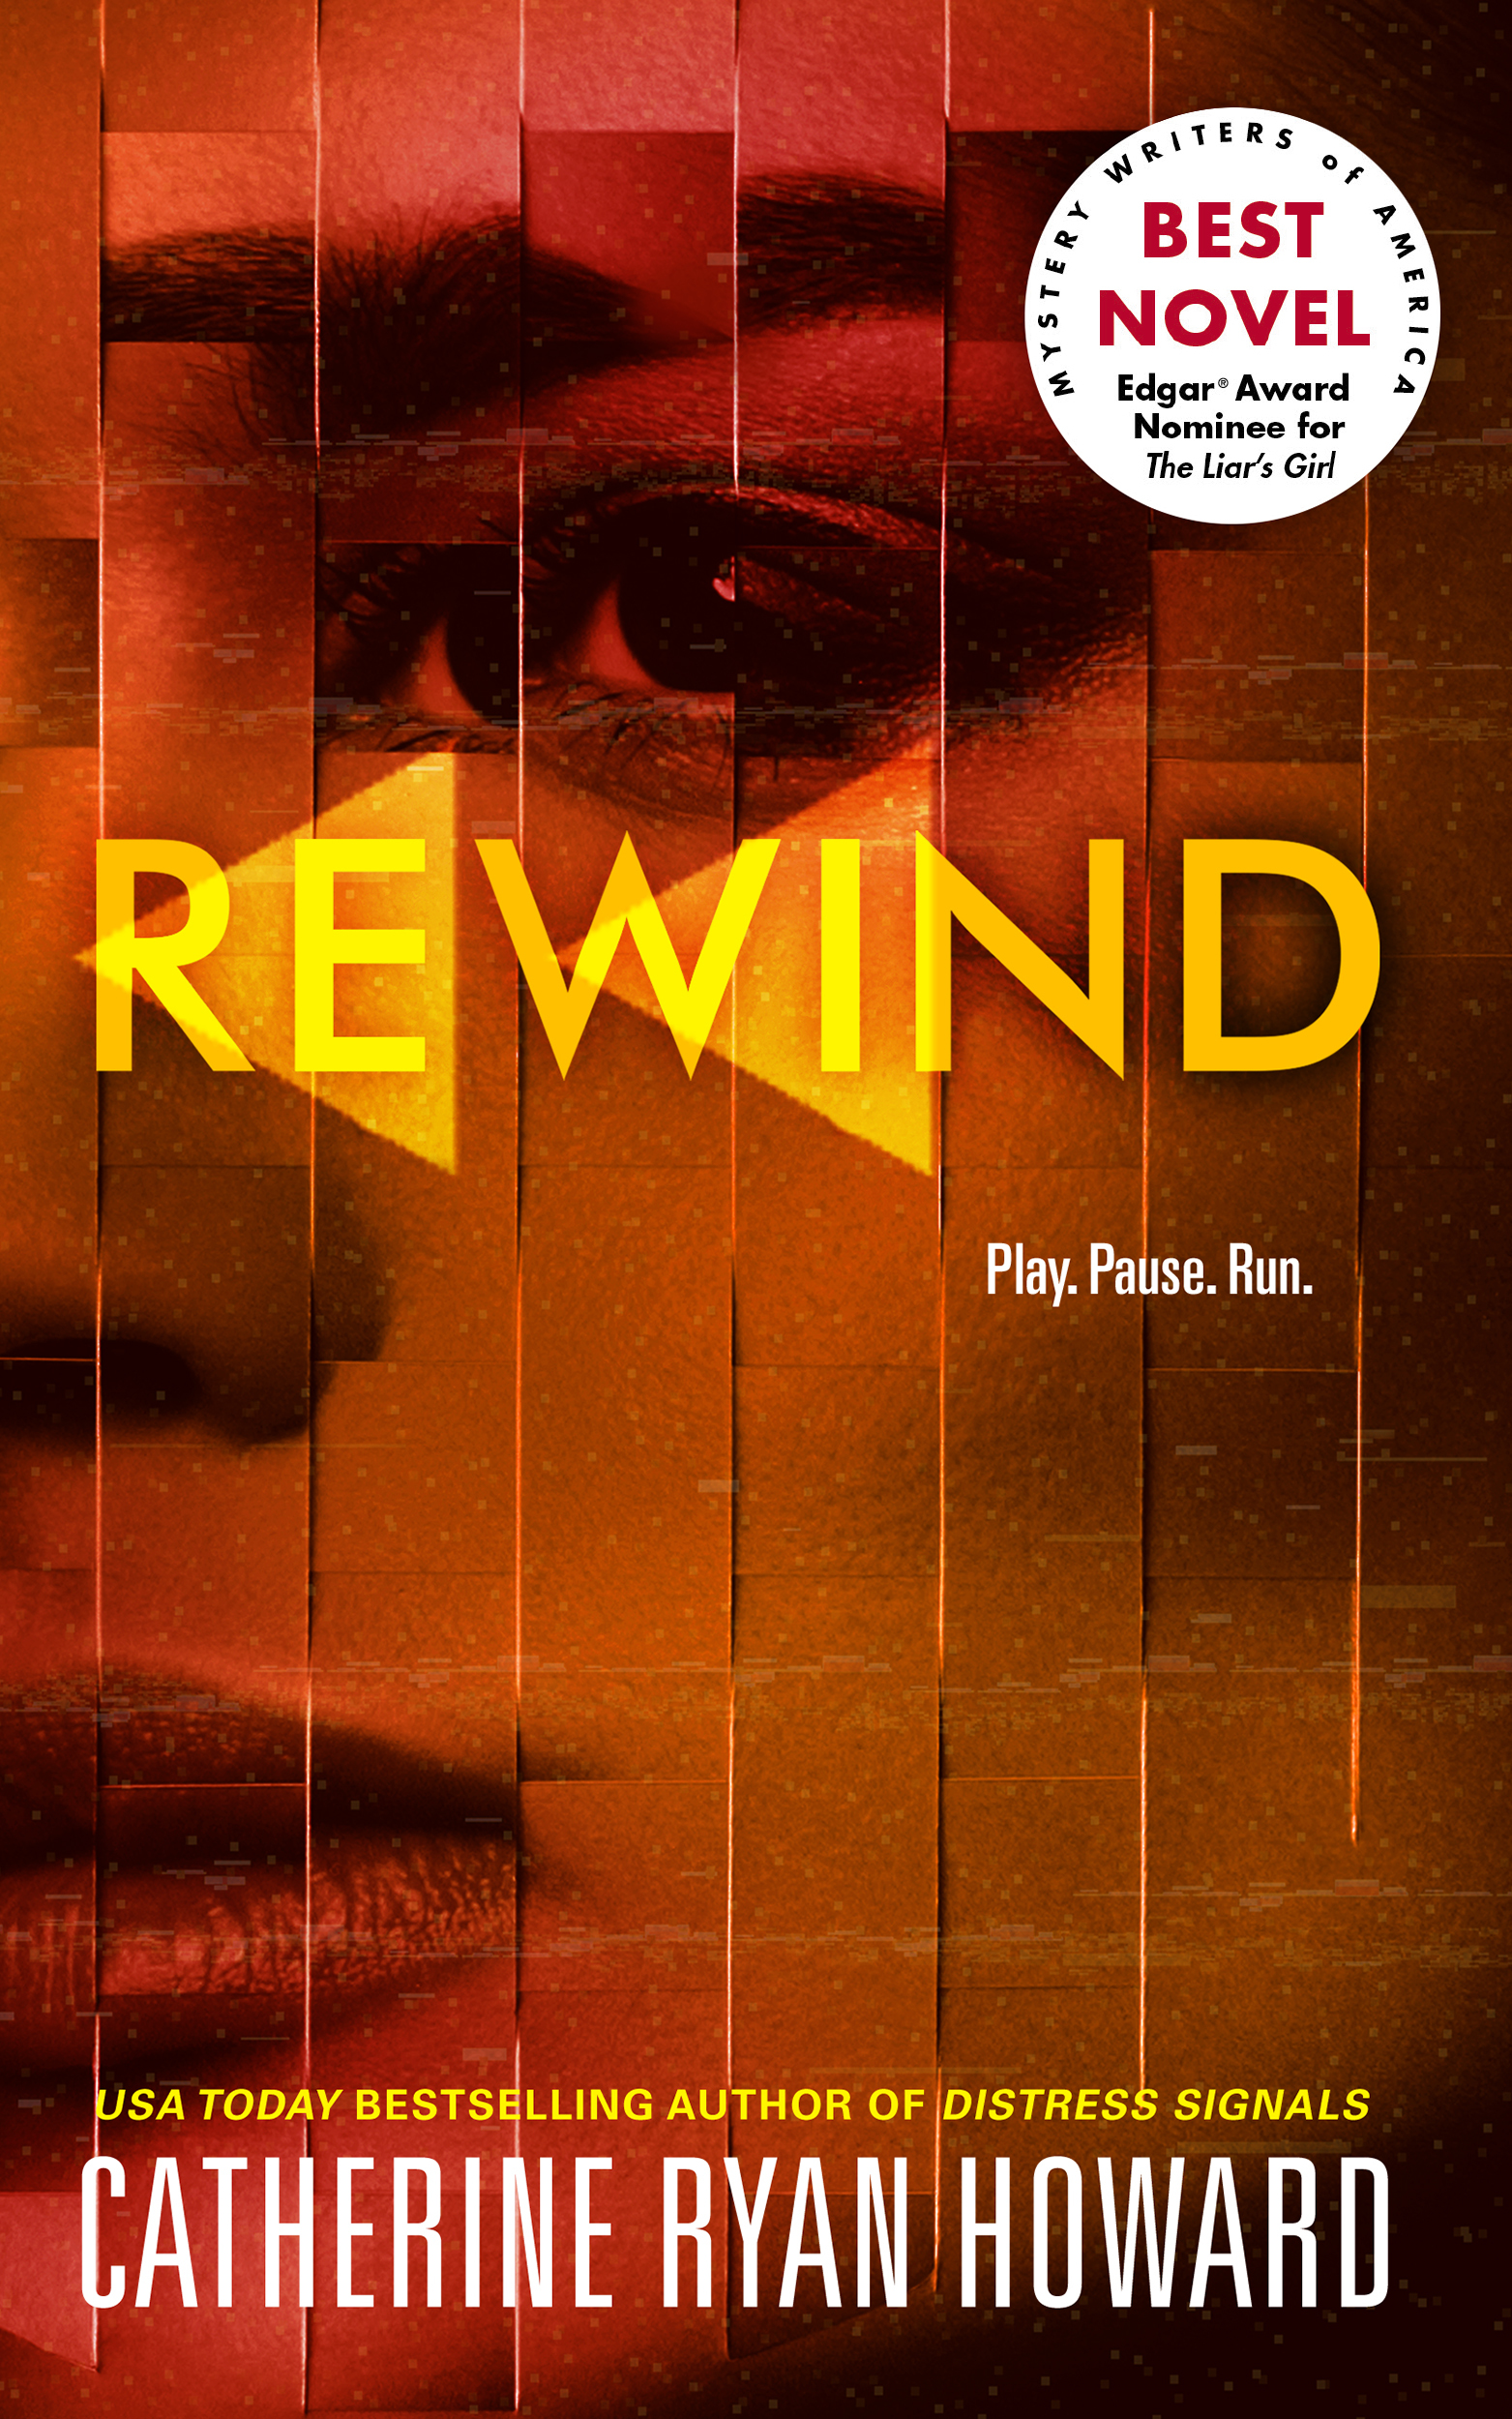 Catherine Ryan Howard's new thriller, REWIND, will release in North America, on September 3, 2019, from Blackstone Publishing.